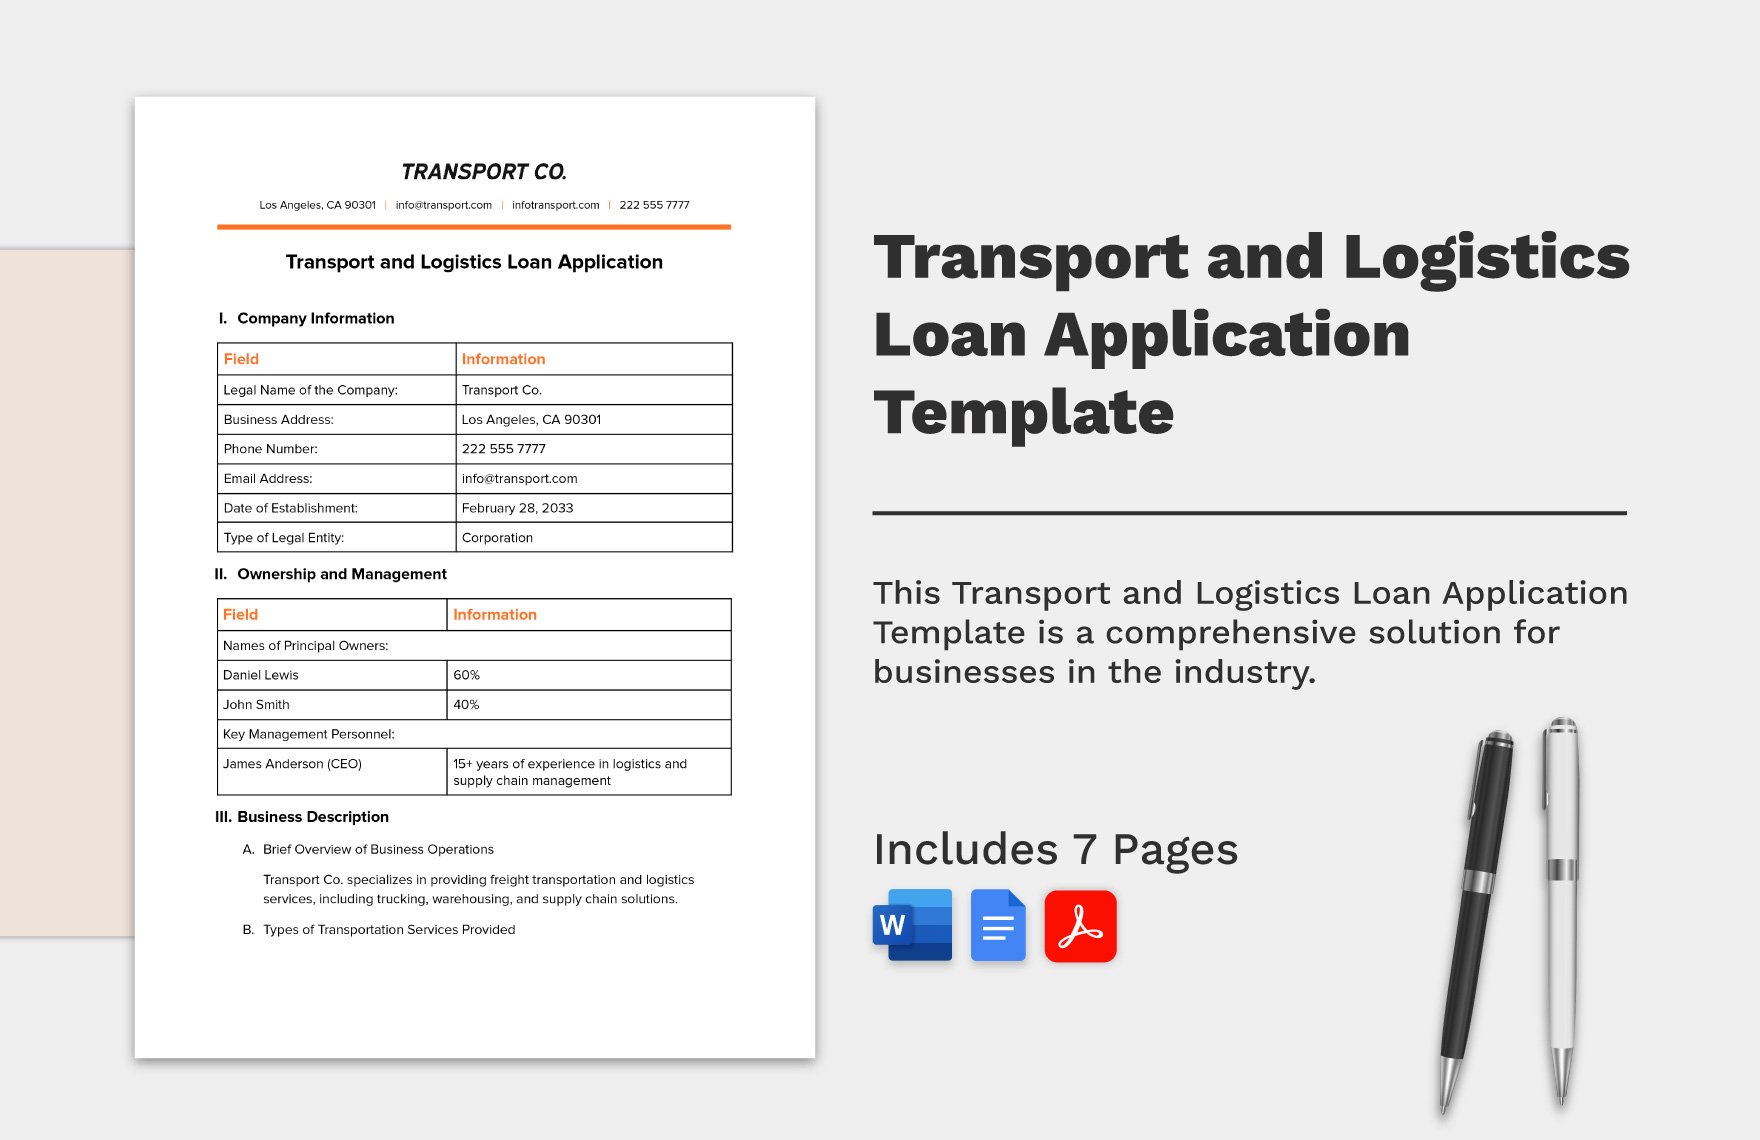 Transport and Logistics Loan Application Template